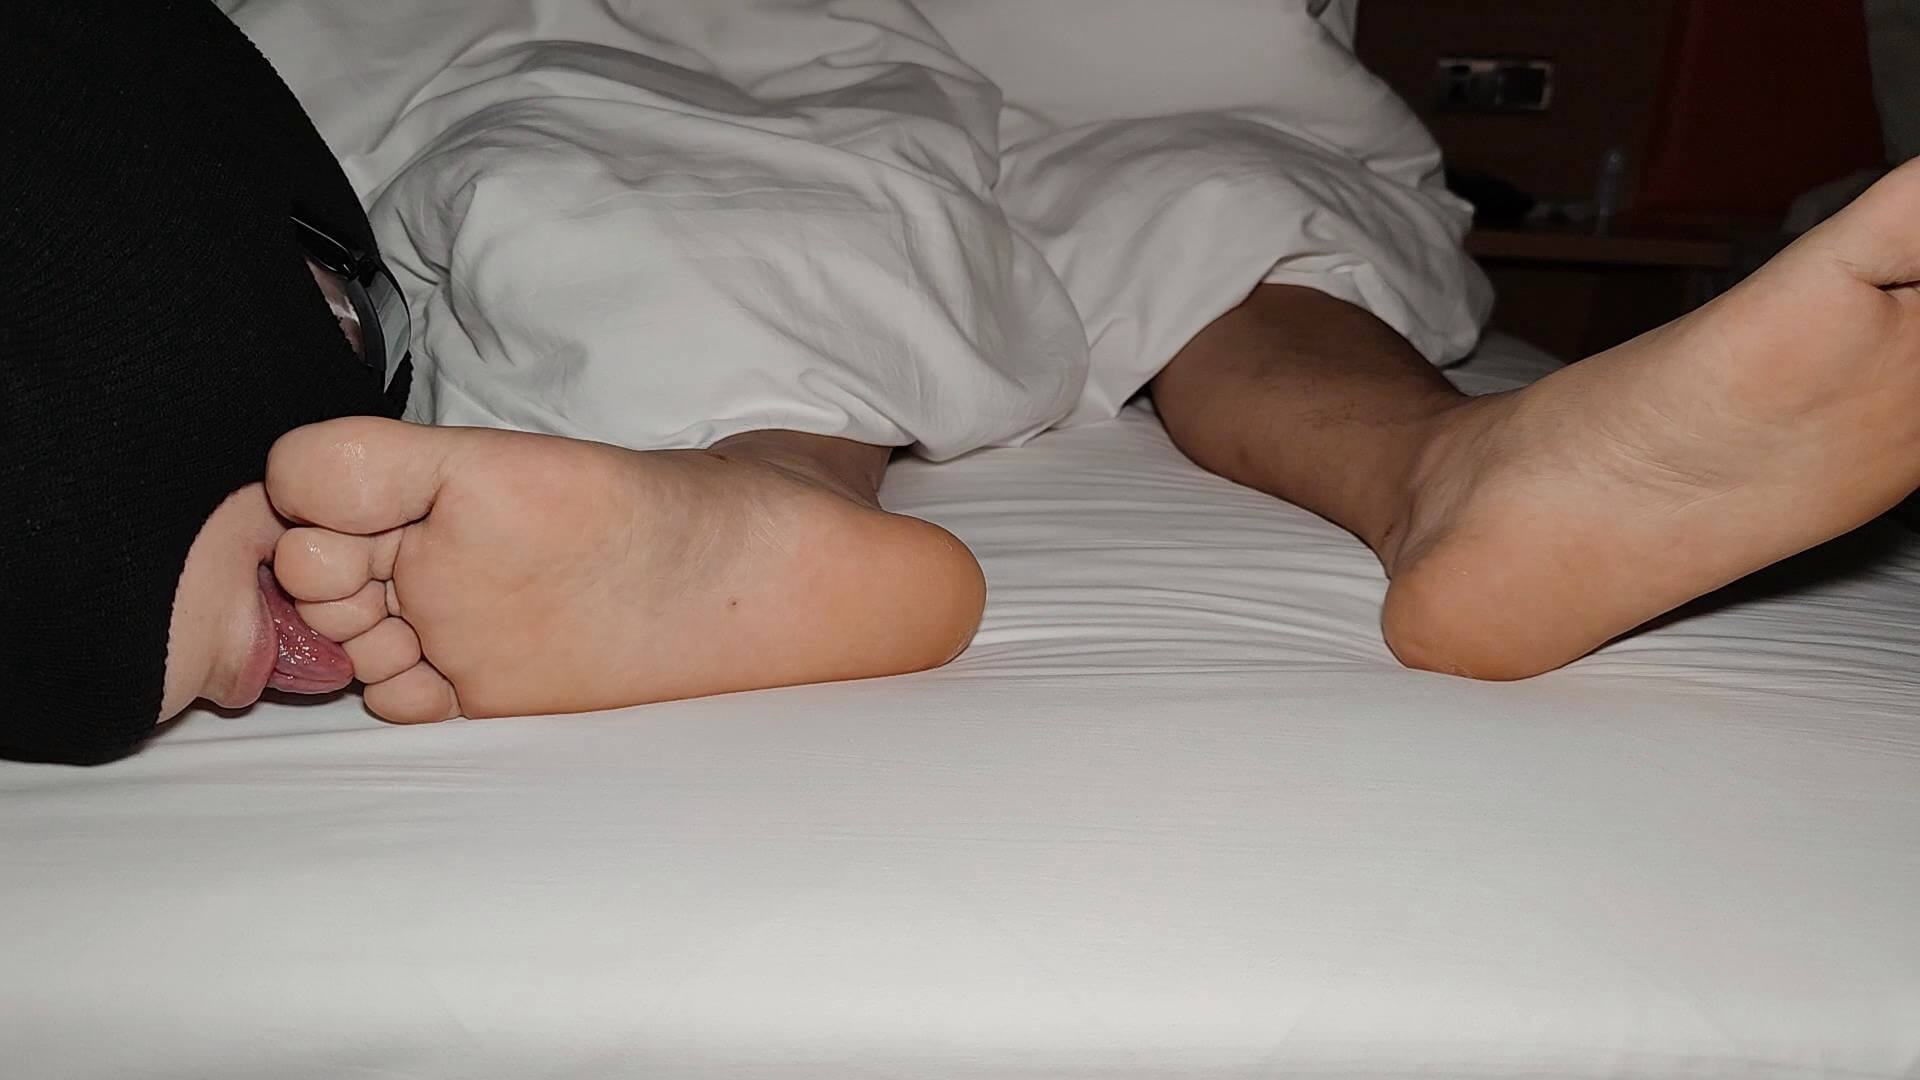 Lick my friend's smelly toes at night!